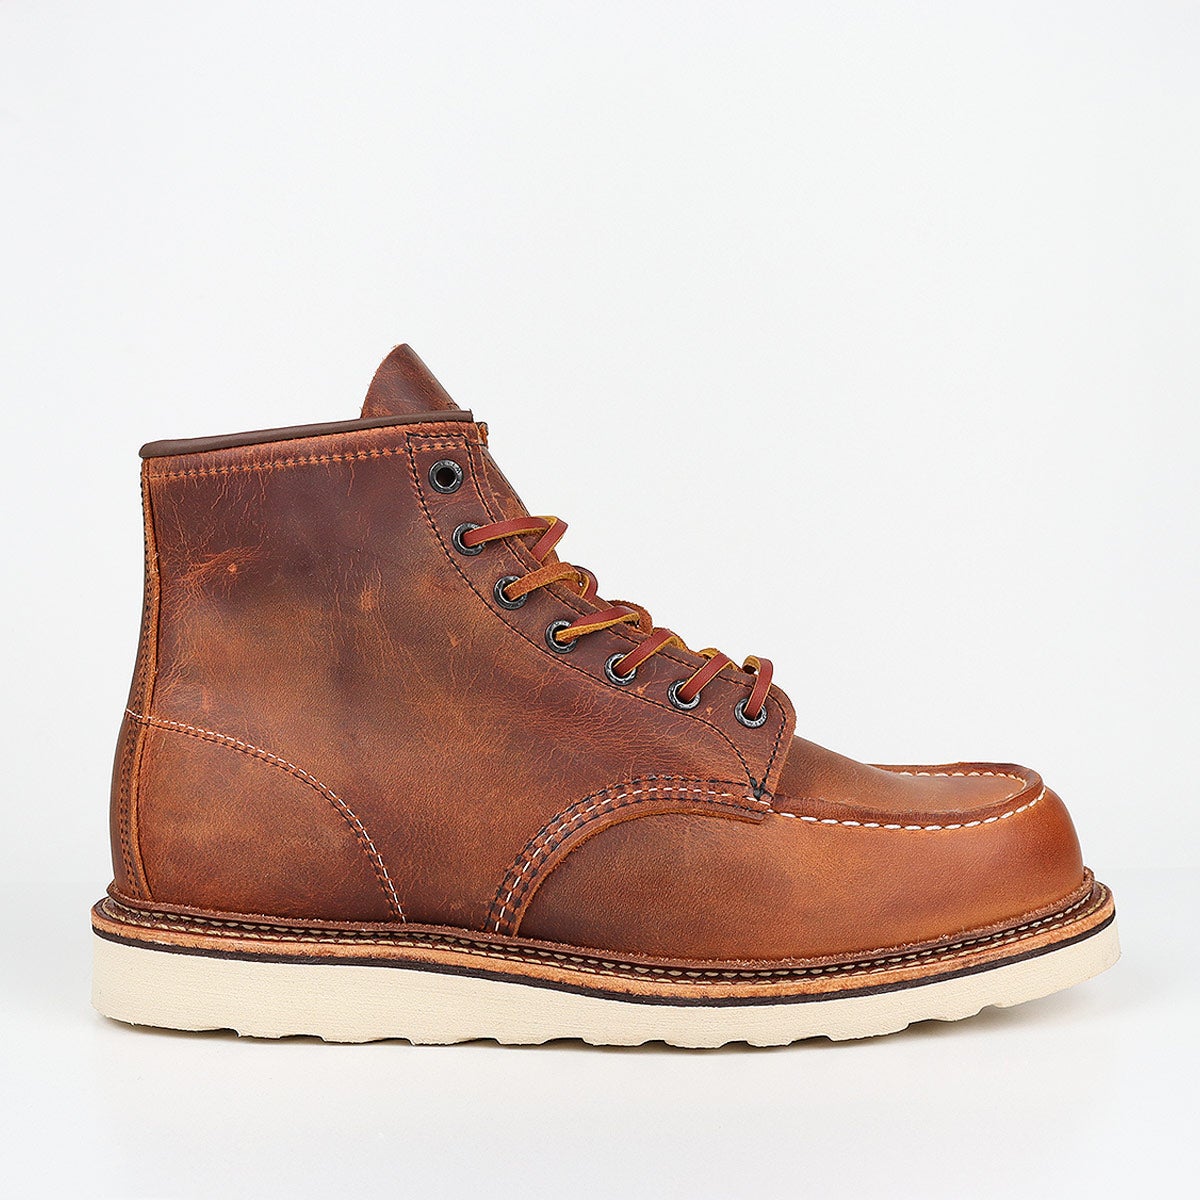 Red Wing Classic 6" Moc Toe Boot, Copper Rough & Tough Leather, Detail Shot 1